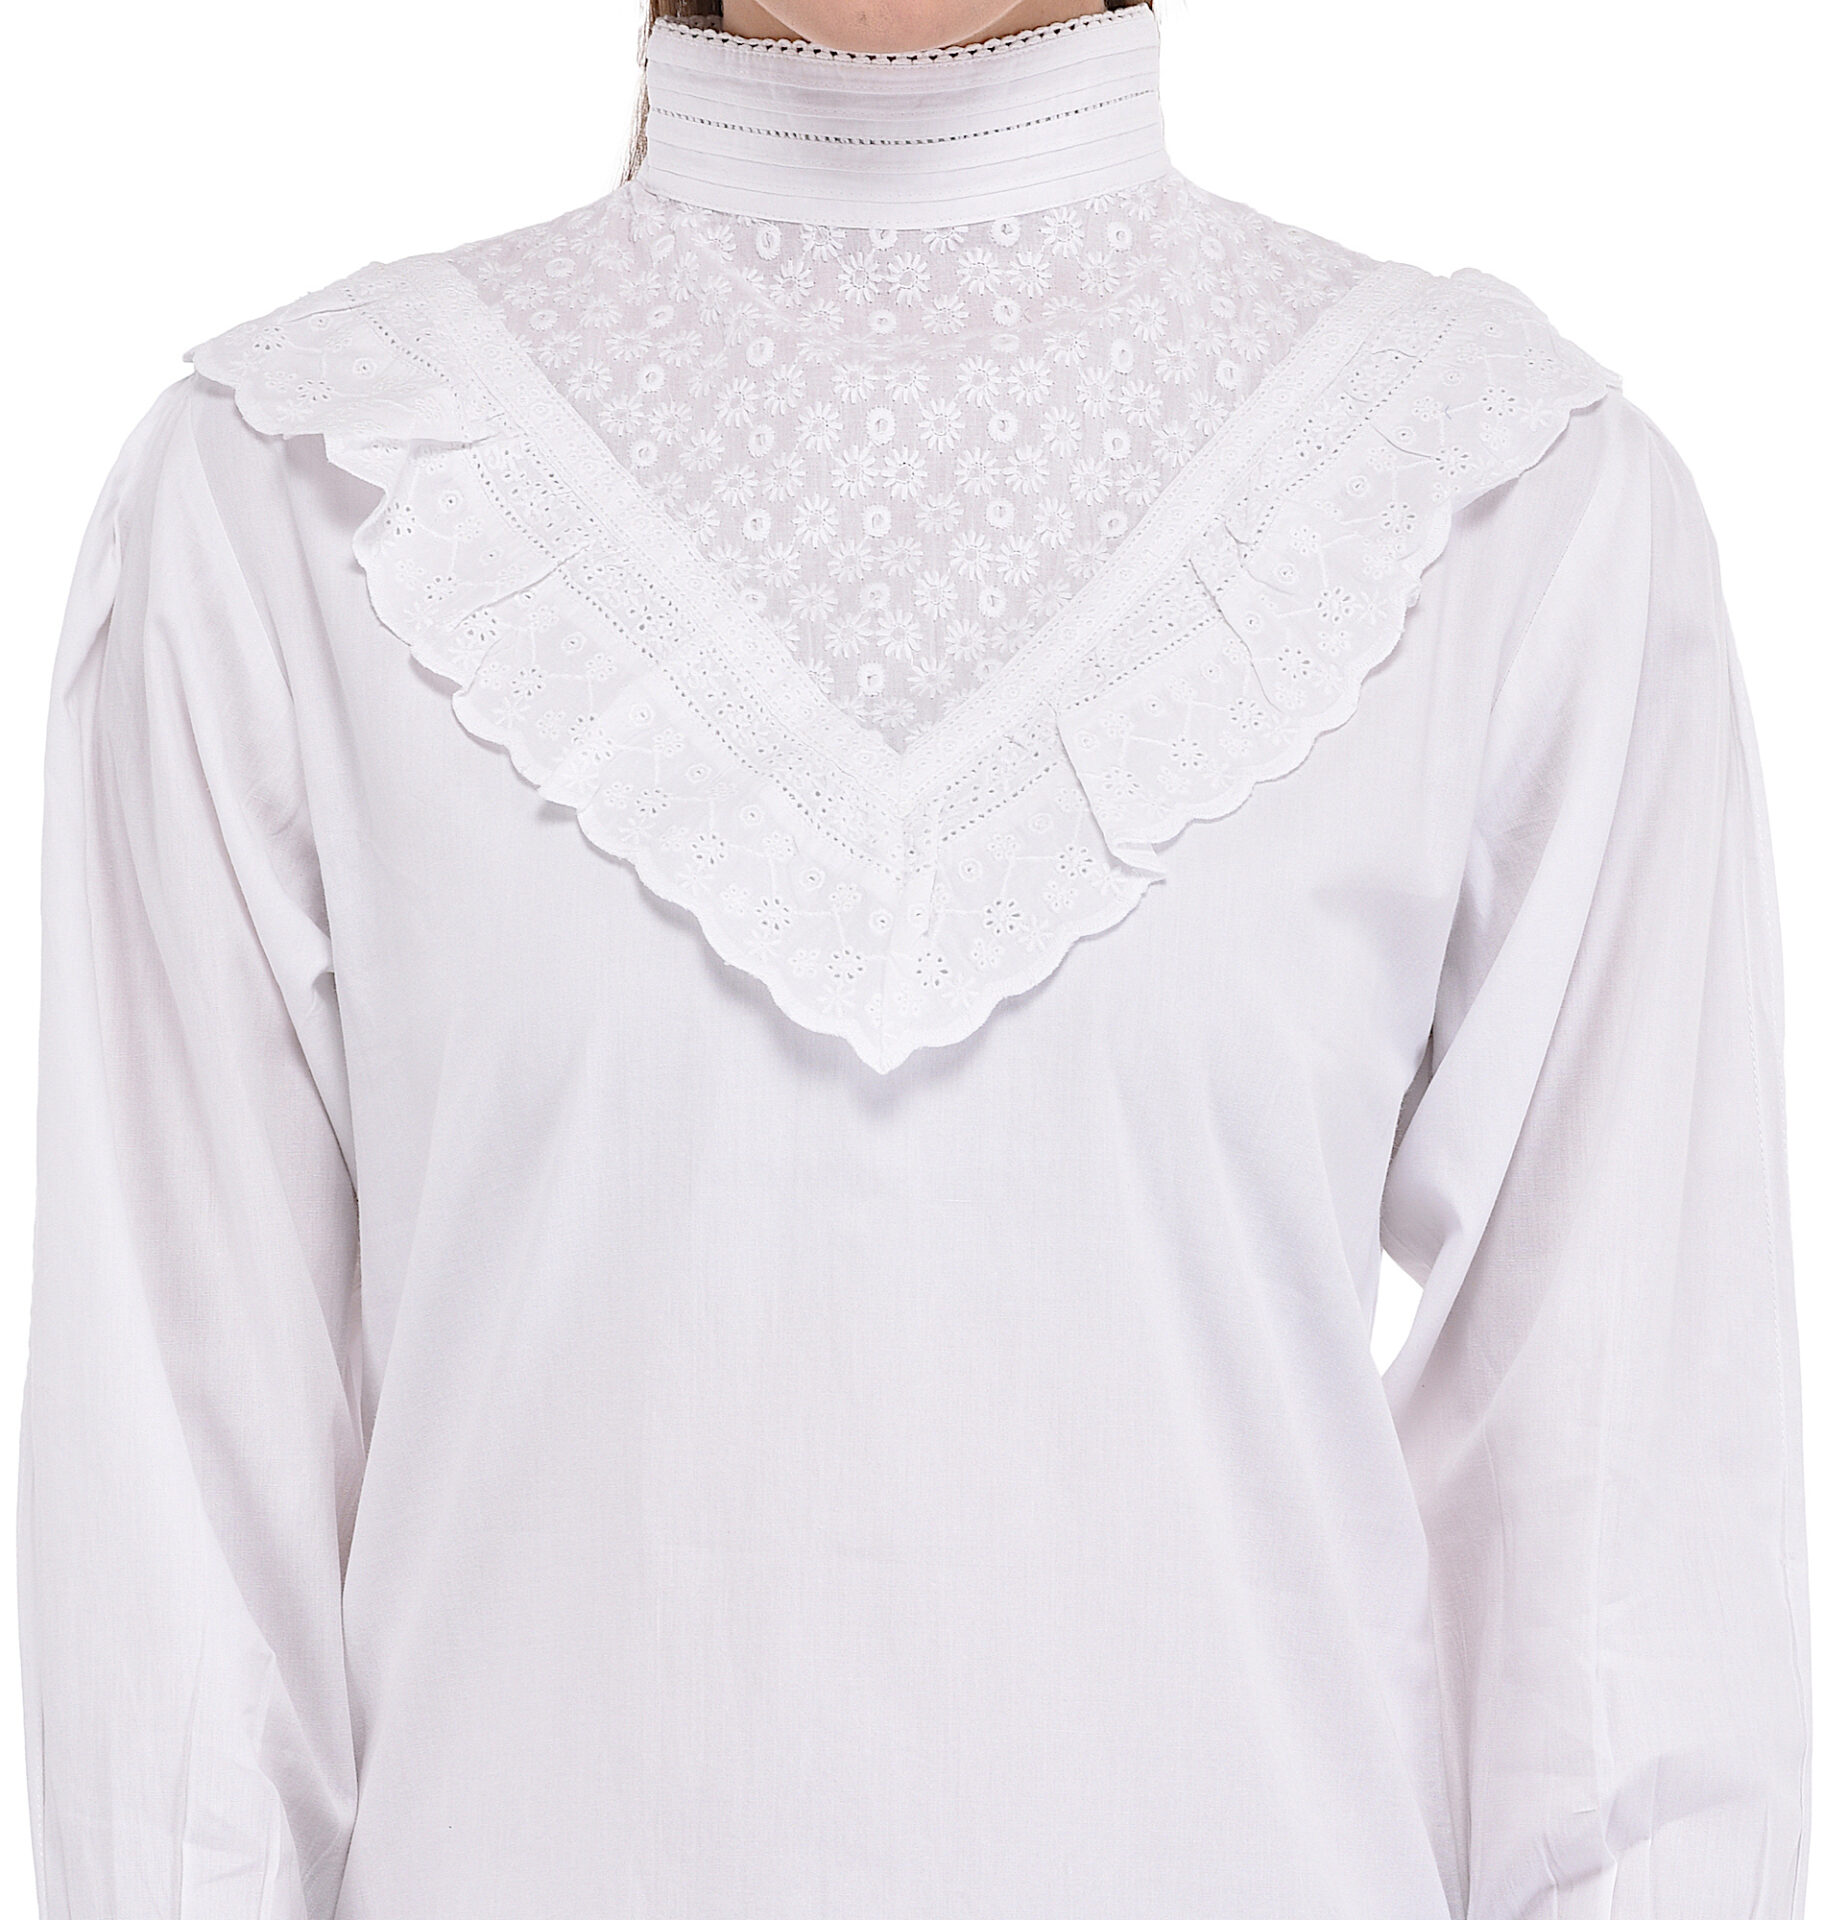 Broderie anglaise blouse white